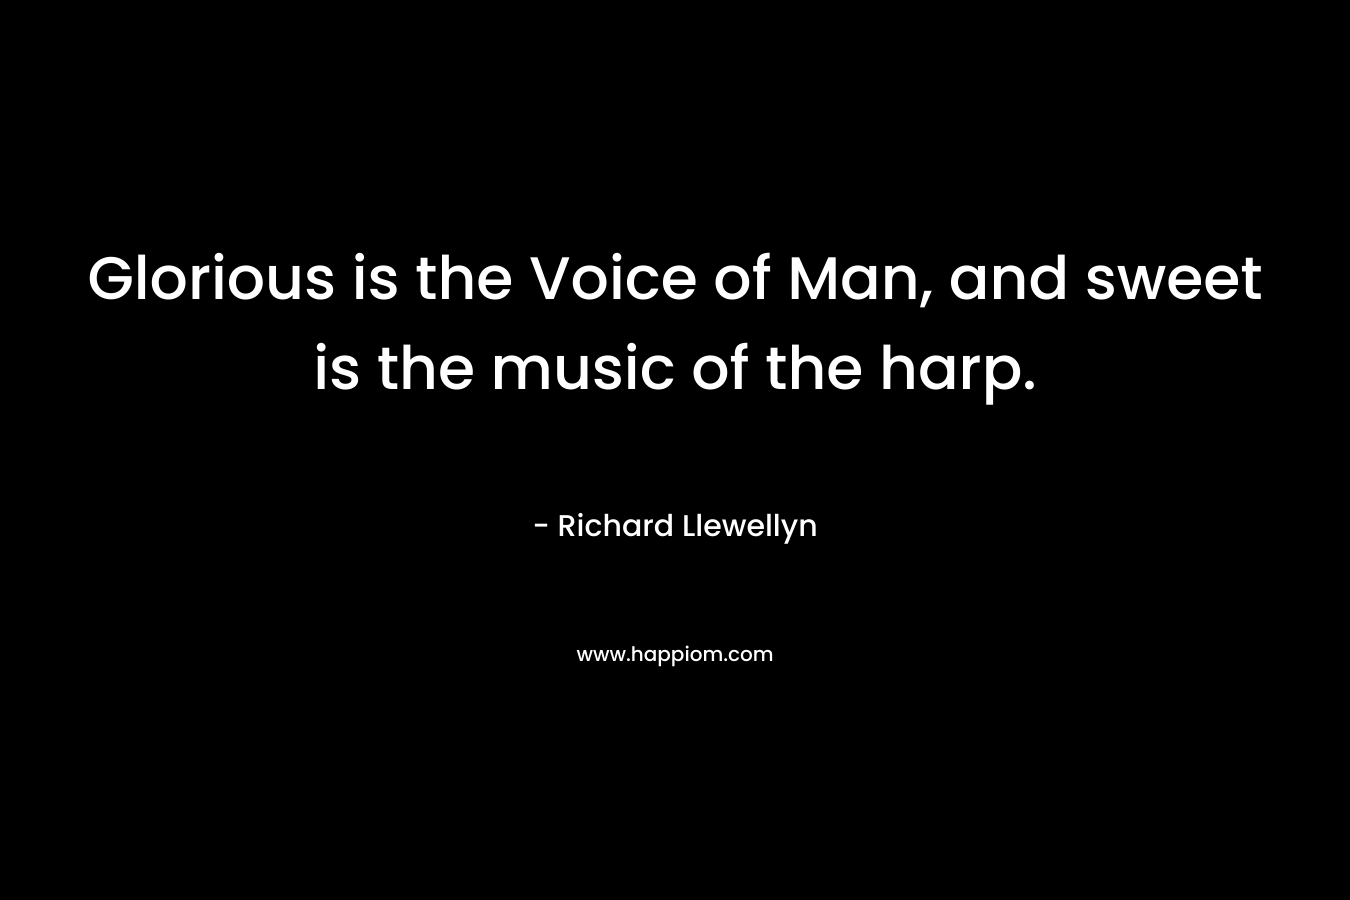 Glorious is the Voice of Man, and sweet is the music of the harp. – Richard Llewellyn